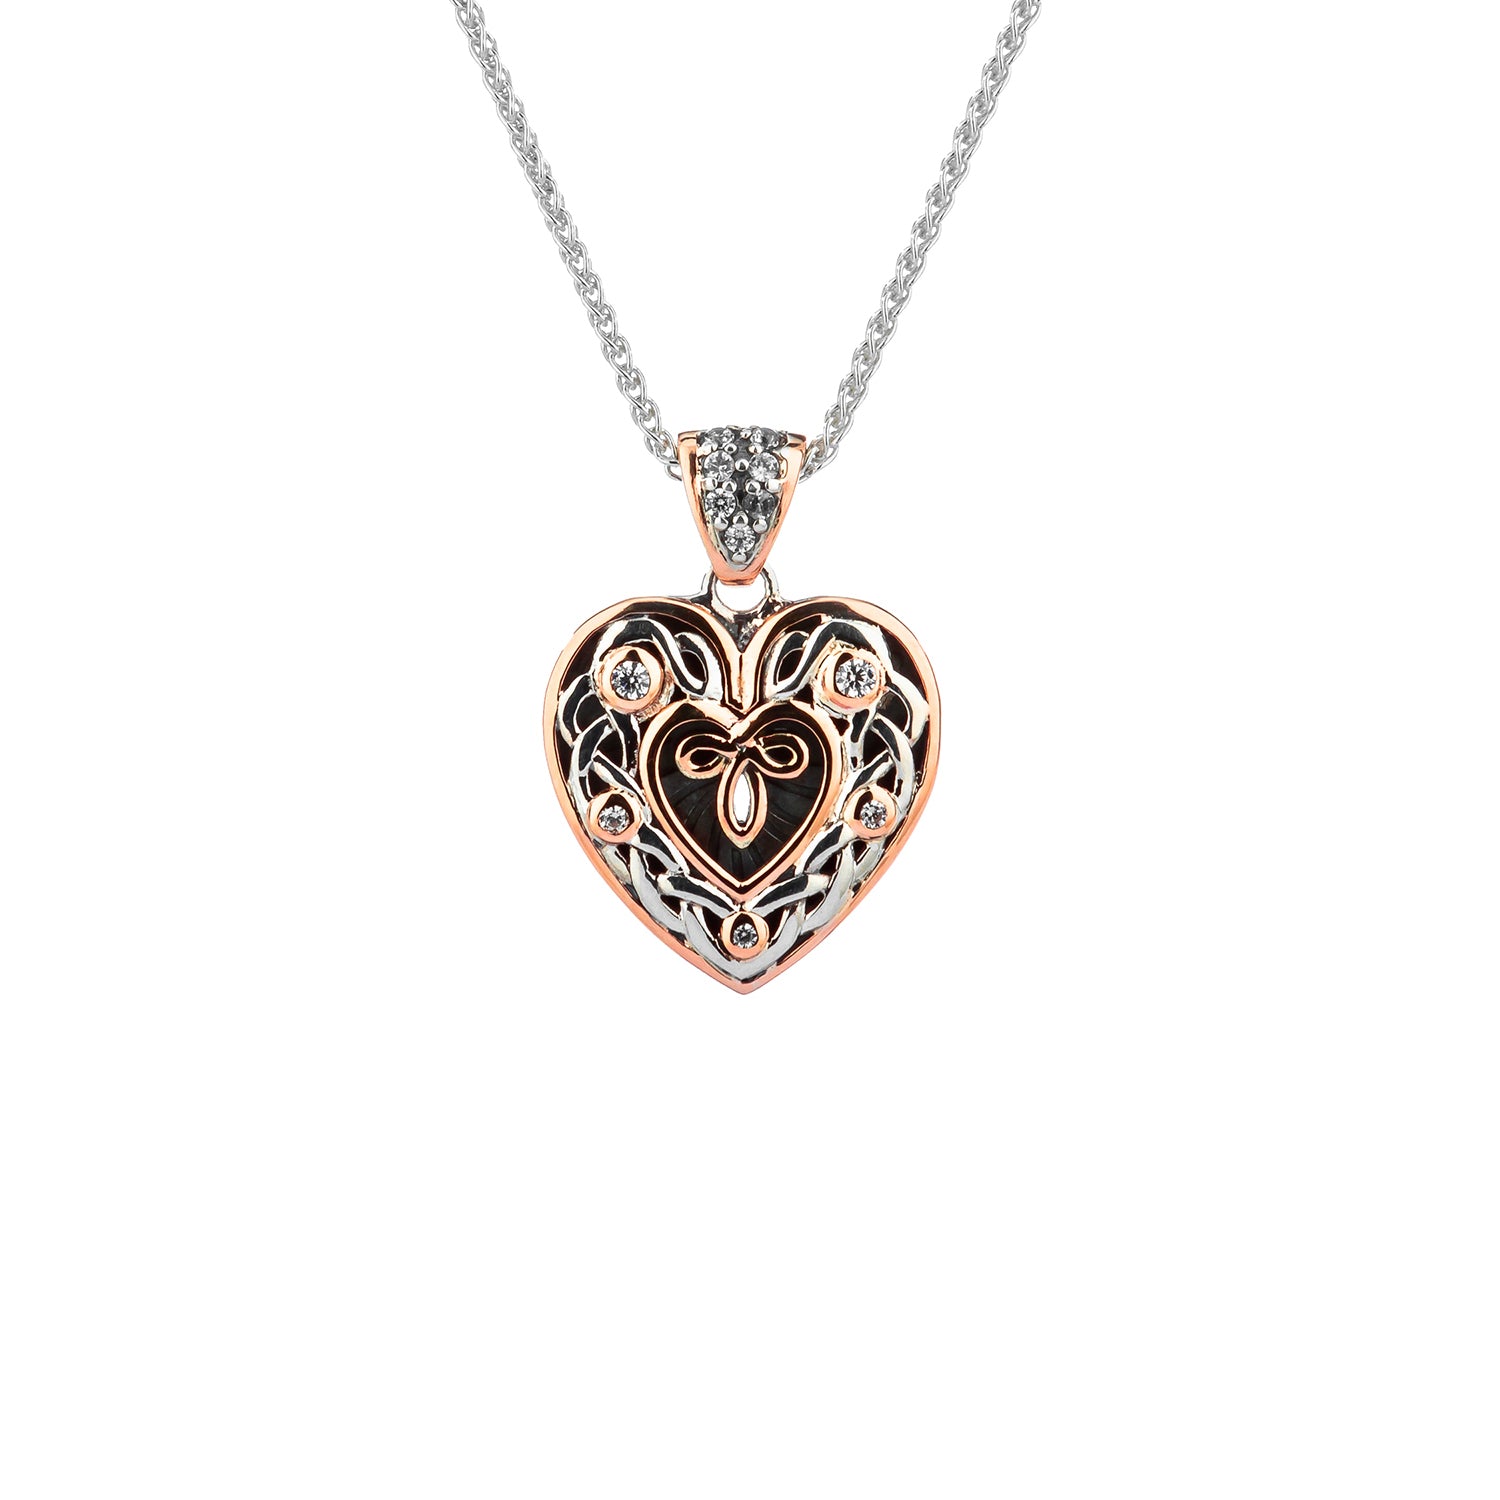 Pendant Oxidized 10k Rose CZ Celtic Heart Small Pendant from welch and company jewelers near syracuse ny 